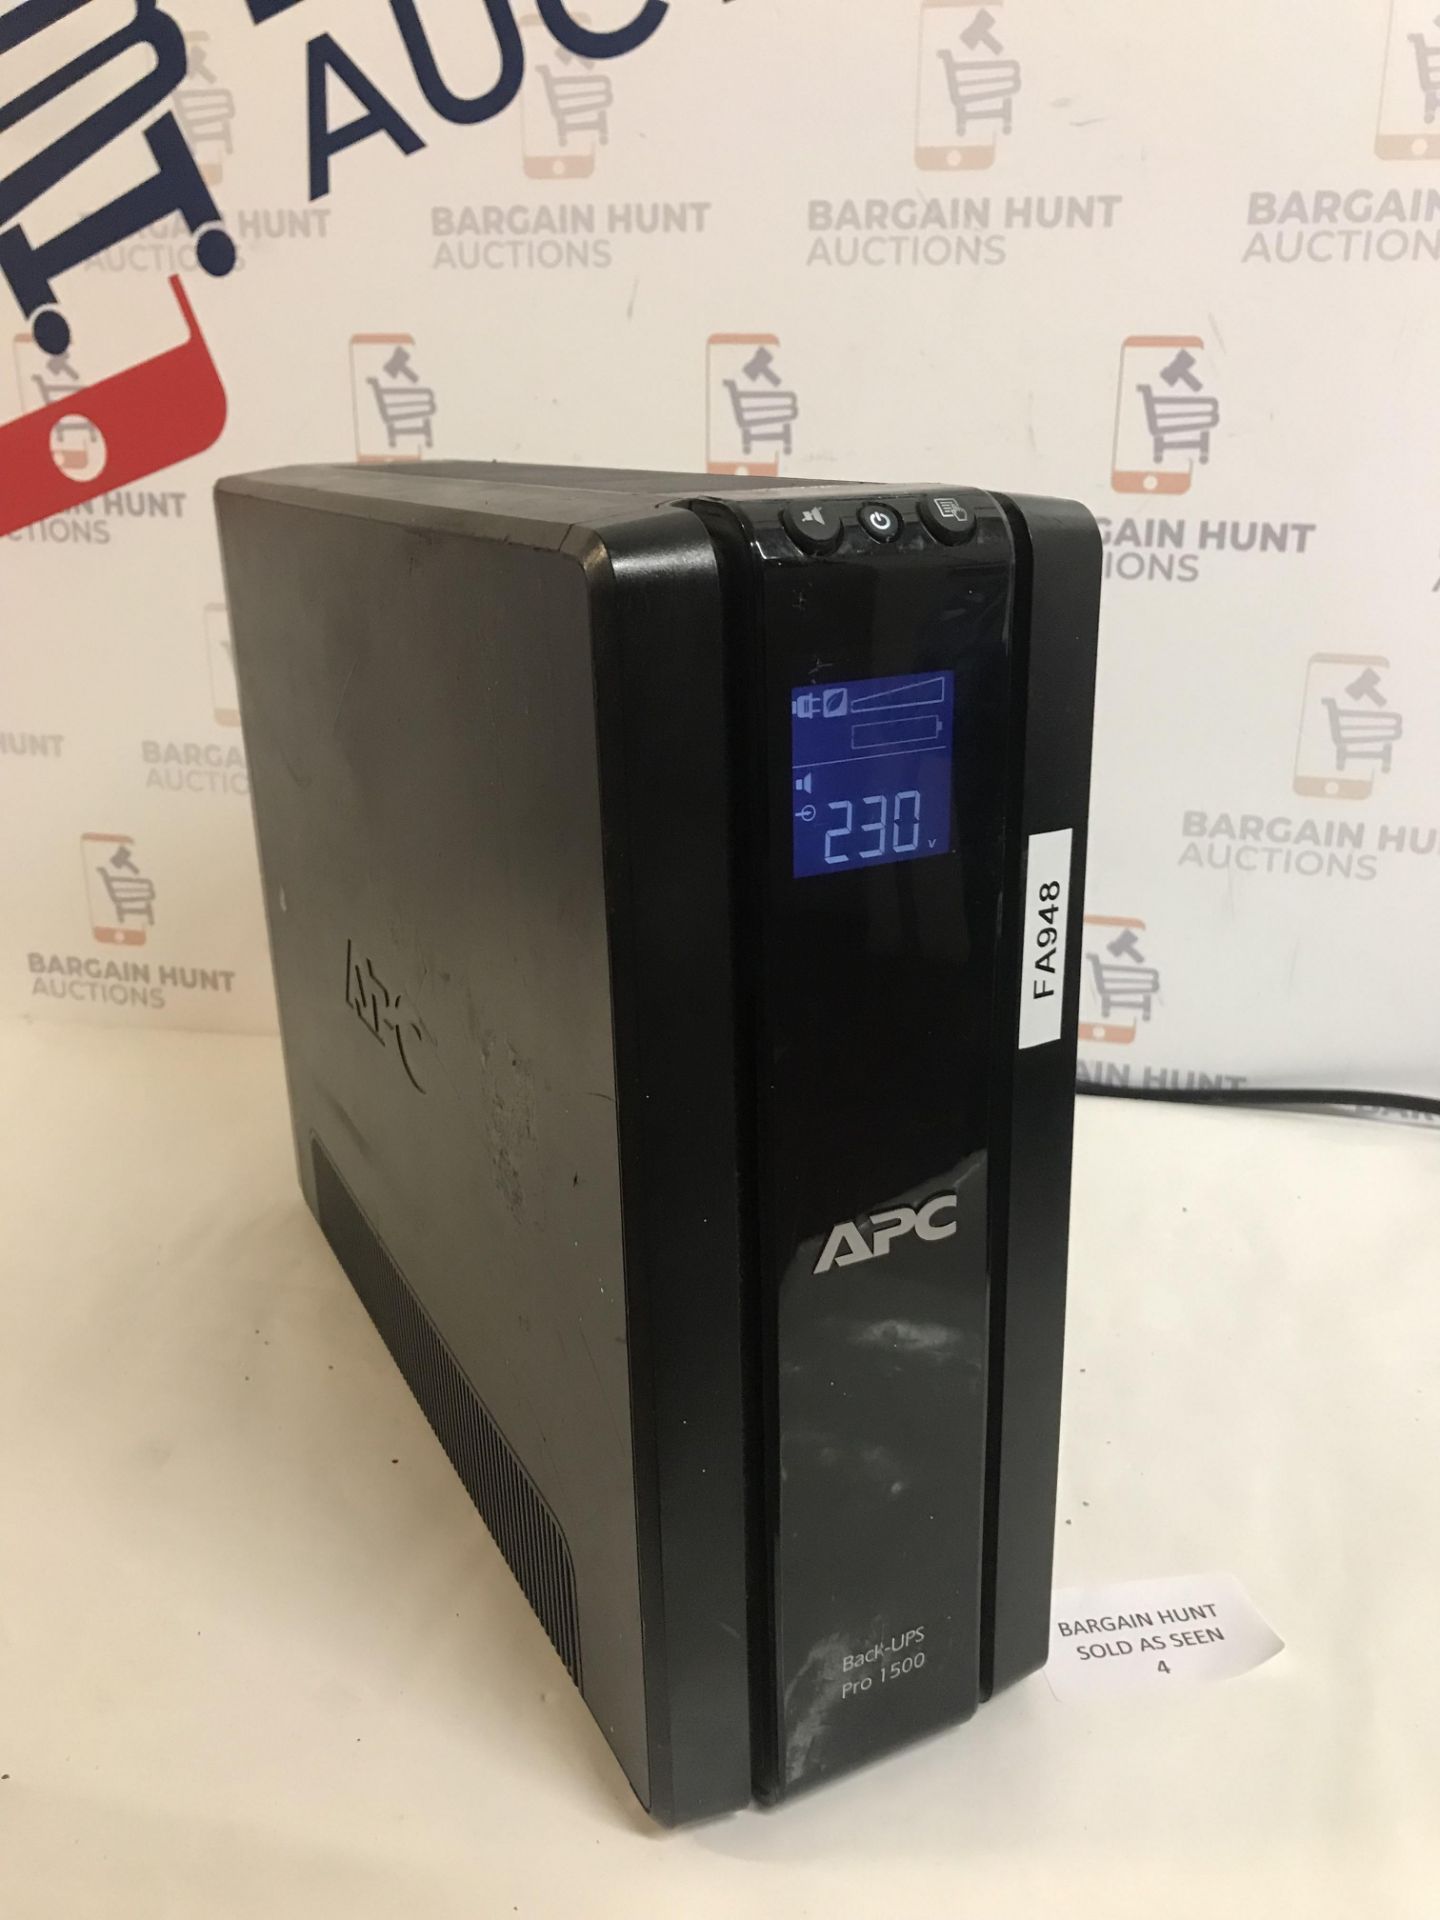 APC Power-Saving Back-UPS PRO 1500- Uninterruptible Power Supply (without power cable)